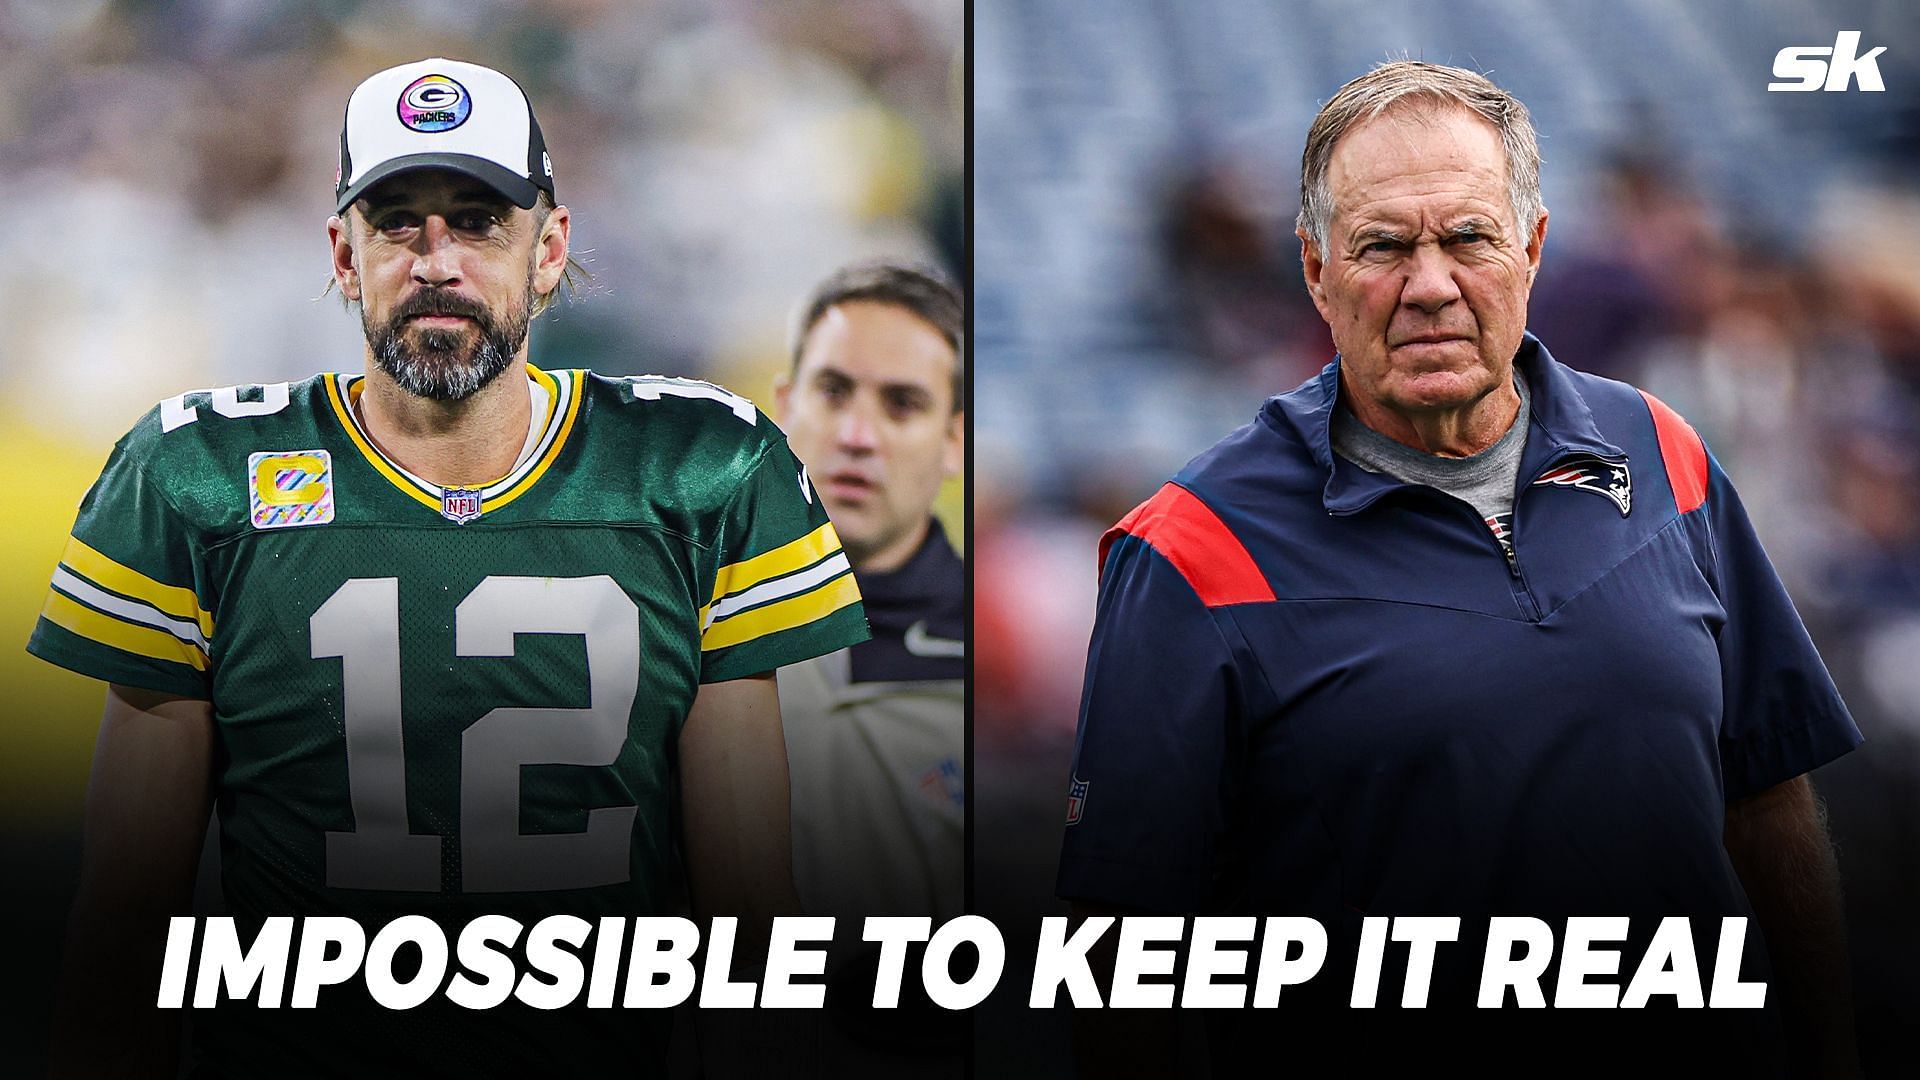 Aaron Rodgers opens up about his relationship with Bill Belichick